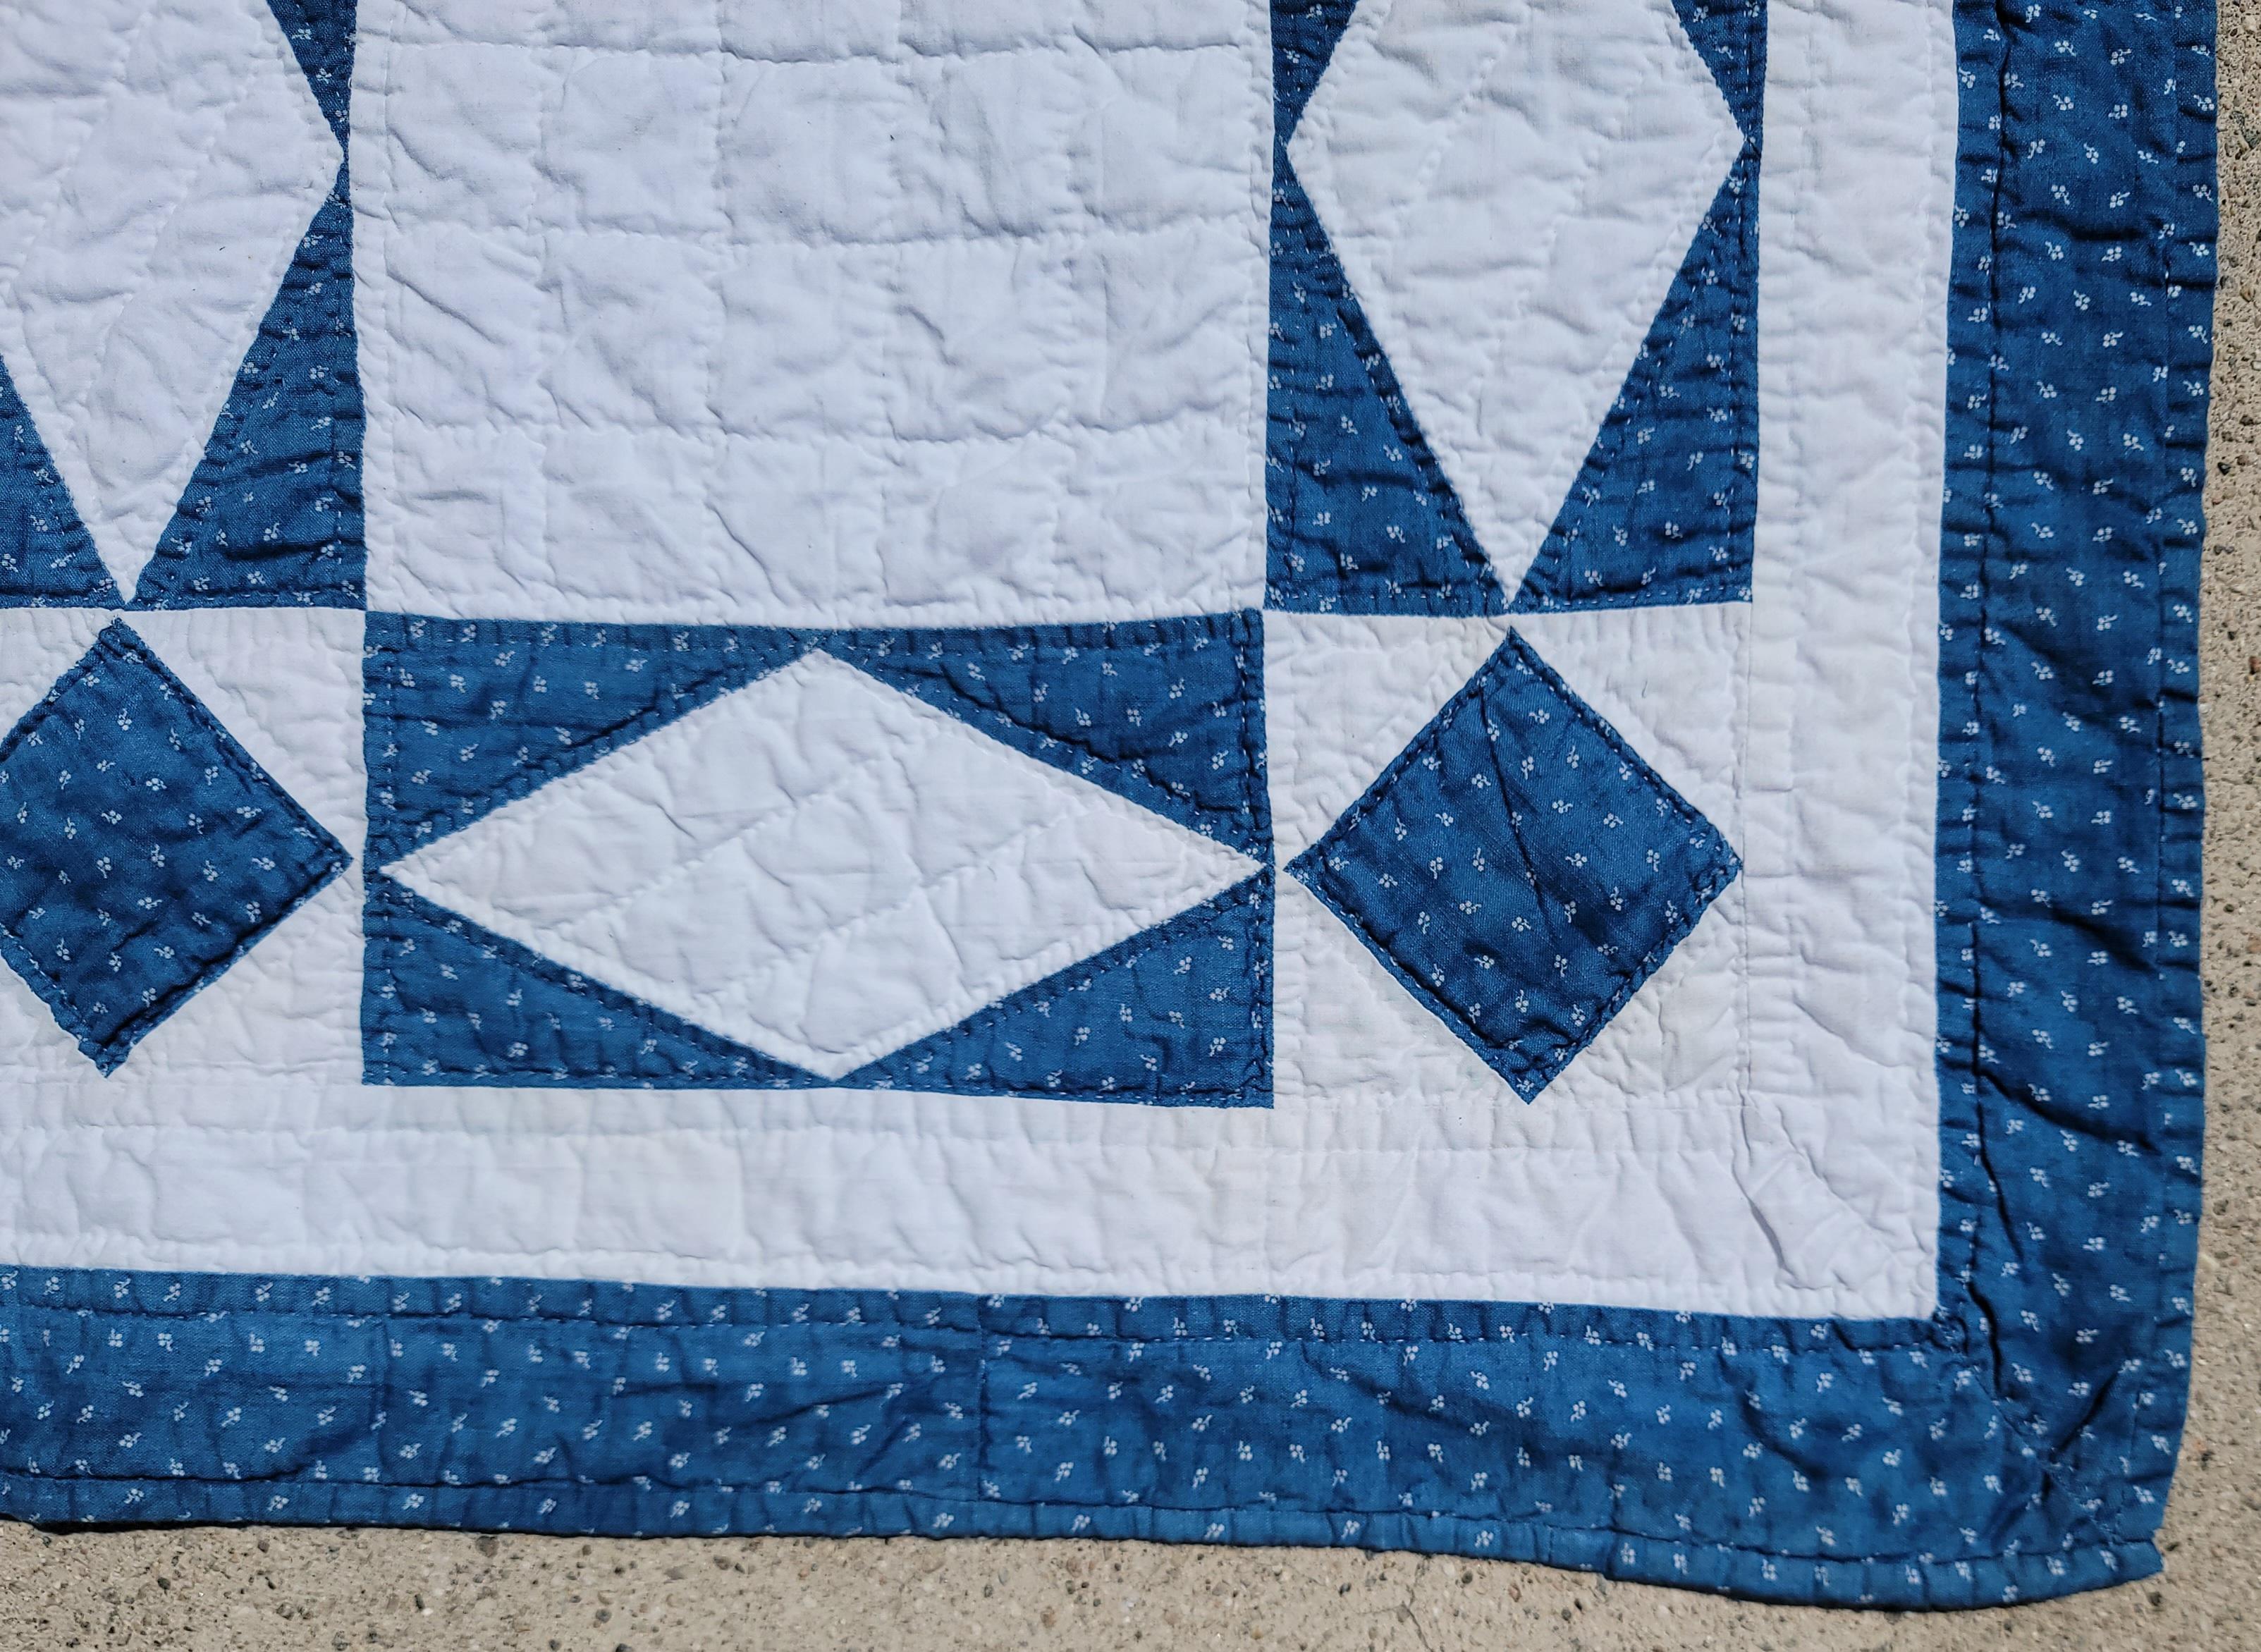 Hand-Crafted 19thc Blue & White Geometric Stars Quilt